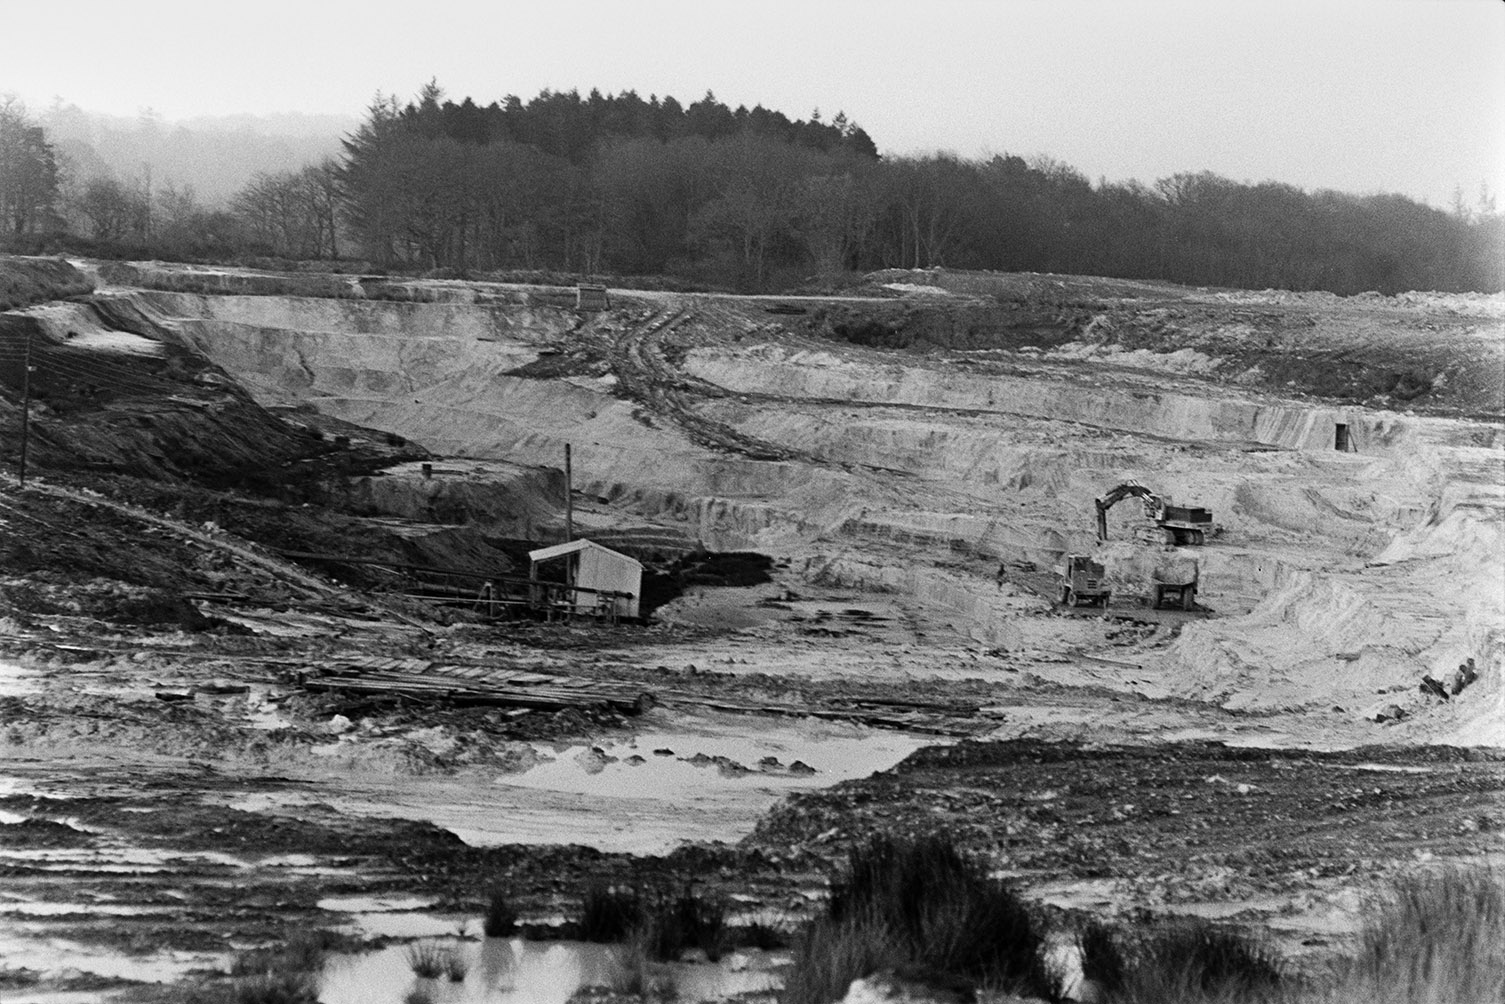 Clay works with a corrugated iron hut at North Devon Clay Pit, Meeth. A digger is excavating in the background.